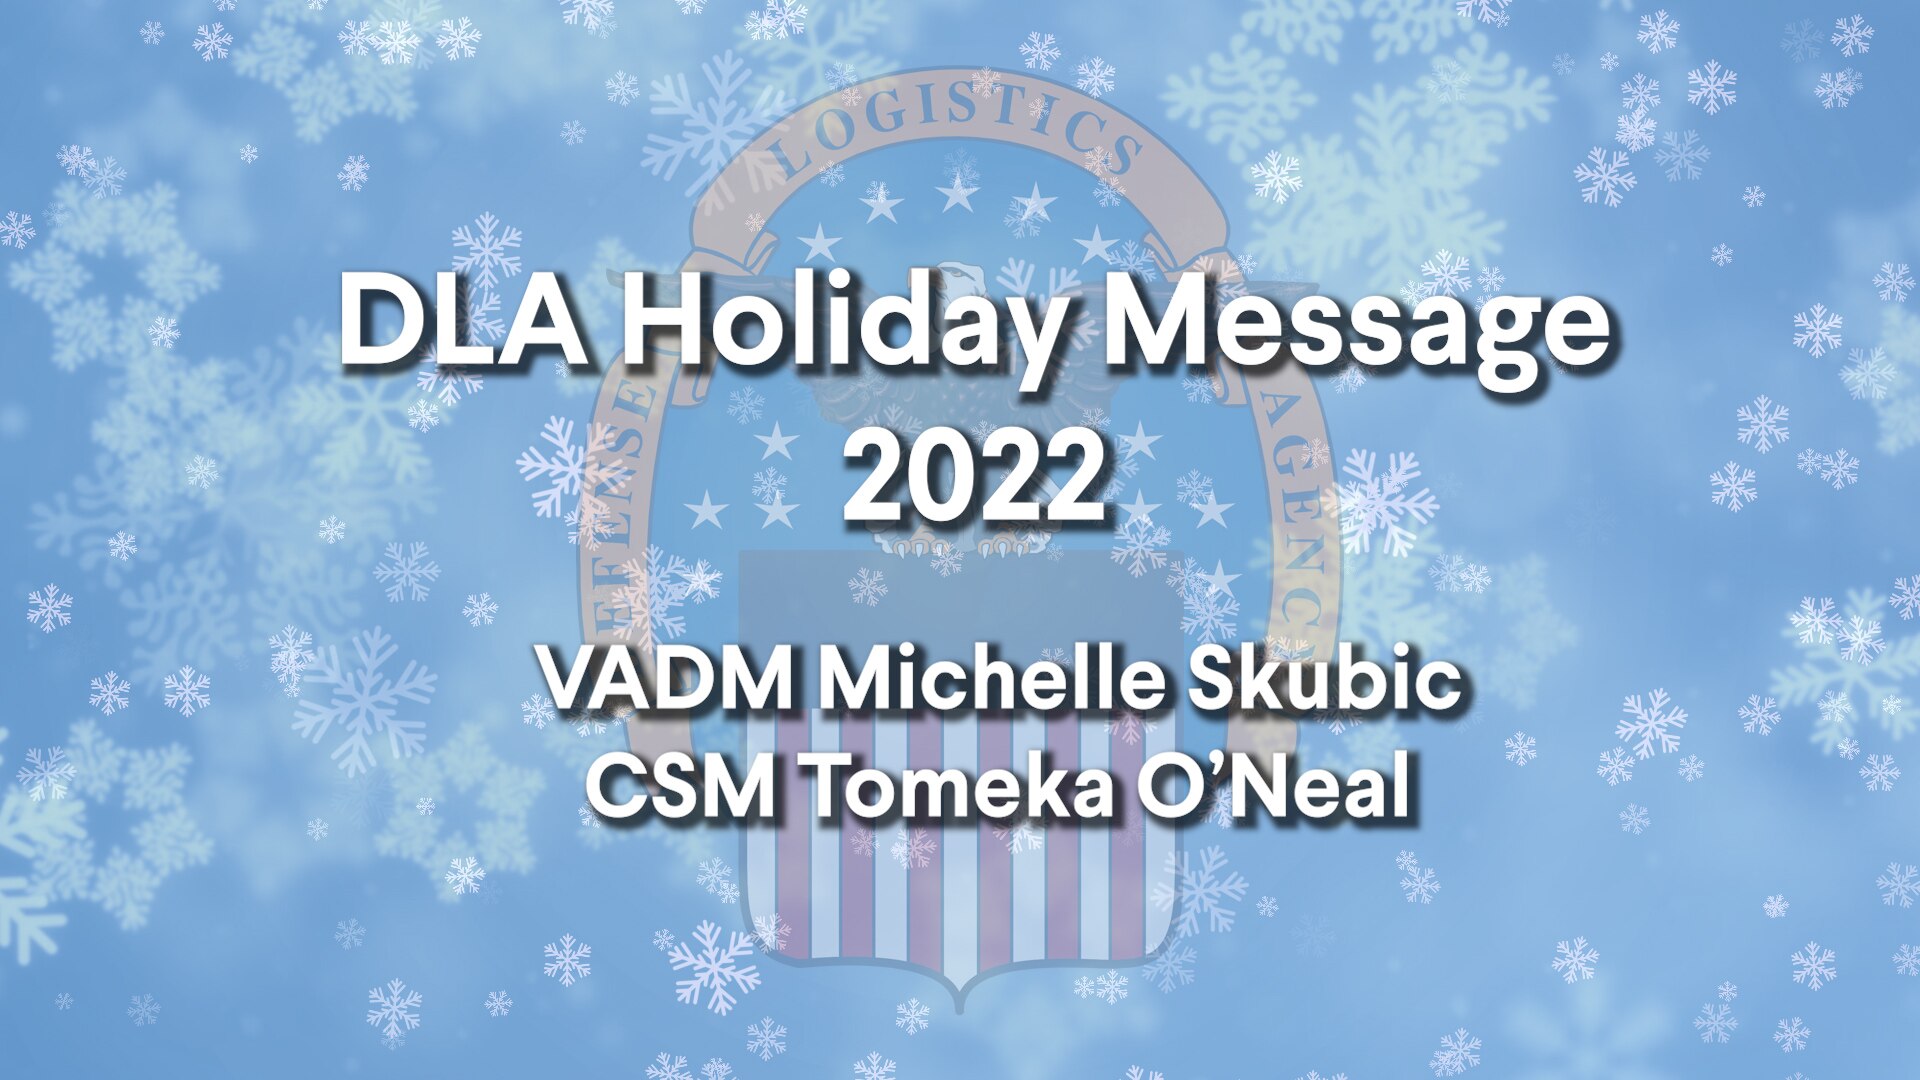 A graphic announcing a holiday video from the Defense Logistics Agency leadership